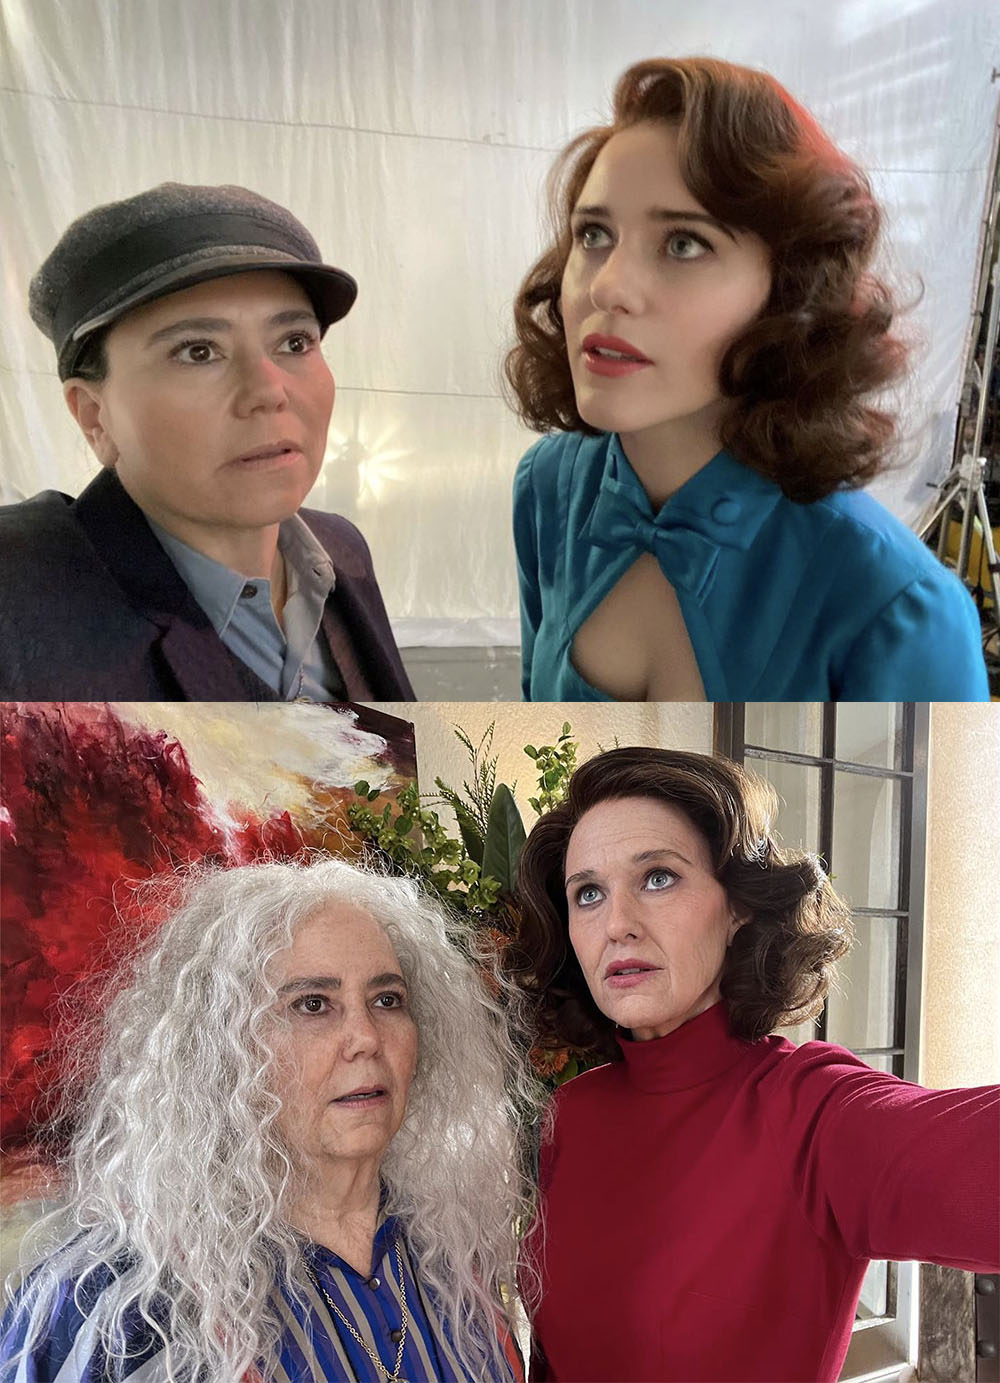 alex borstein and rachel brosnahan in aged makeup for finale